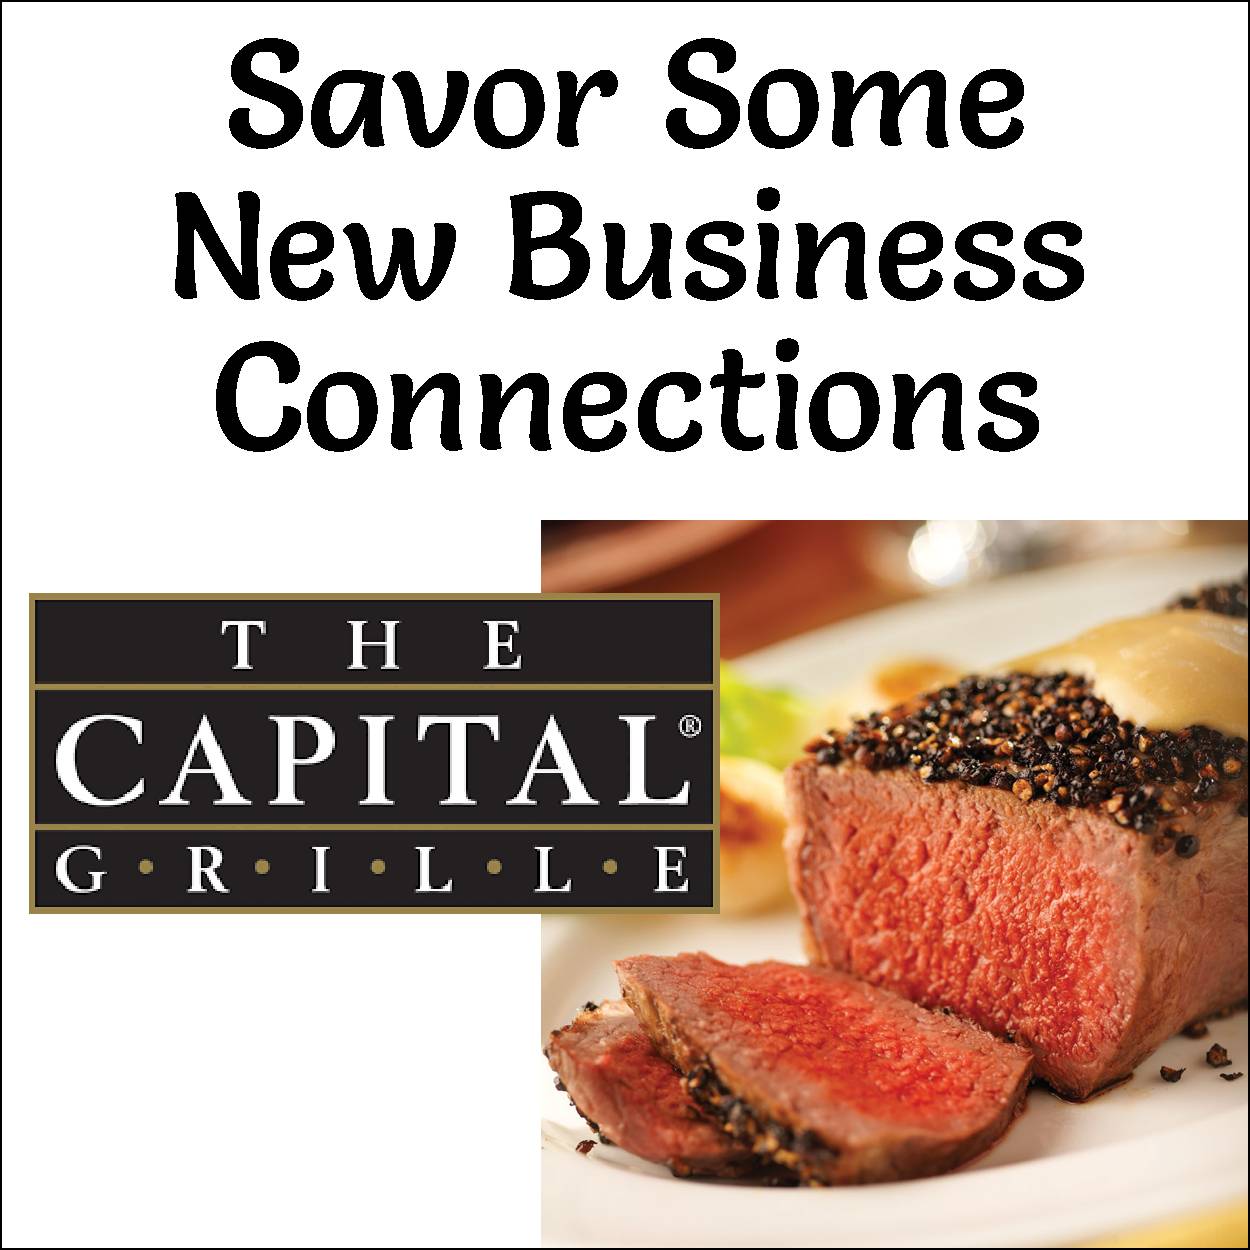 February Business Luncheon: Networking at the Capital Grille